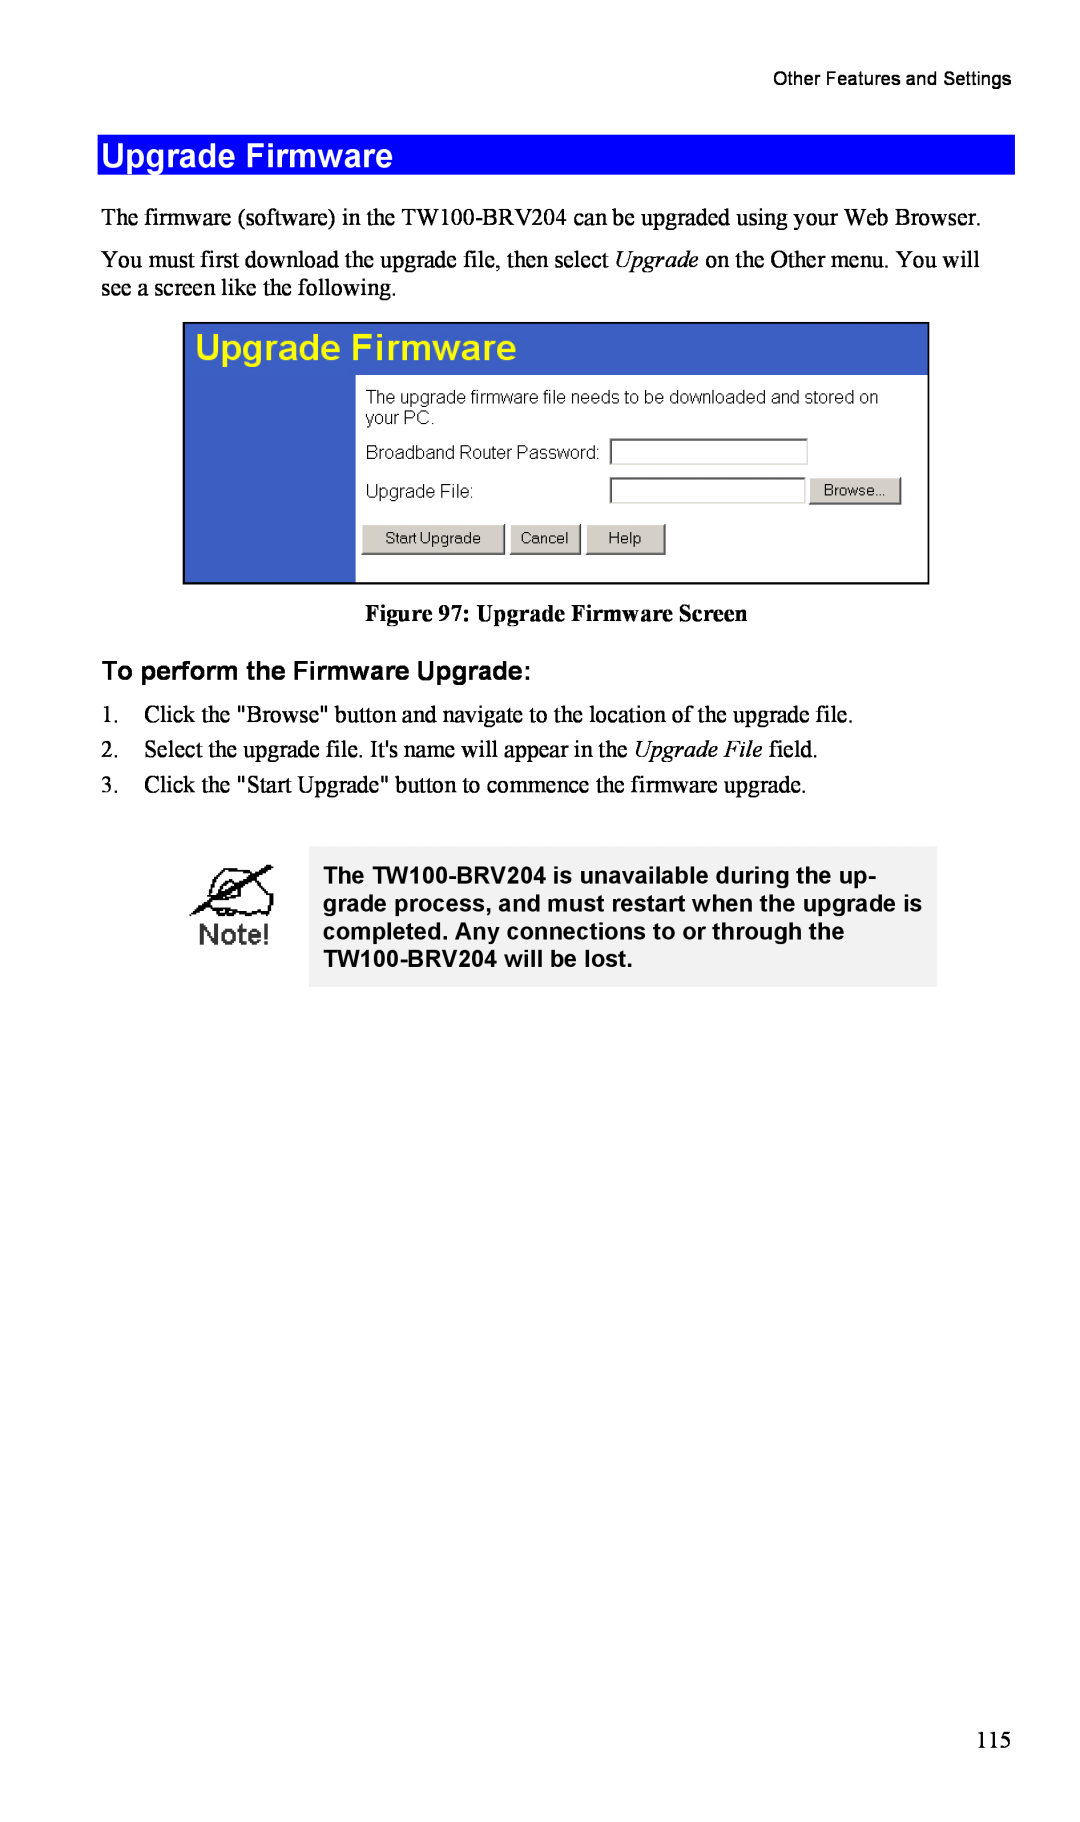 TRENDnet TW100-BRV204, VPN Firewall Router manual Upgrade Firmware, To perform the Firmware Upgrade 